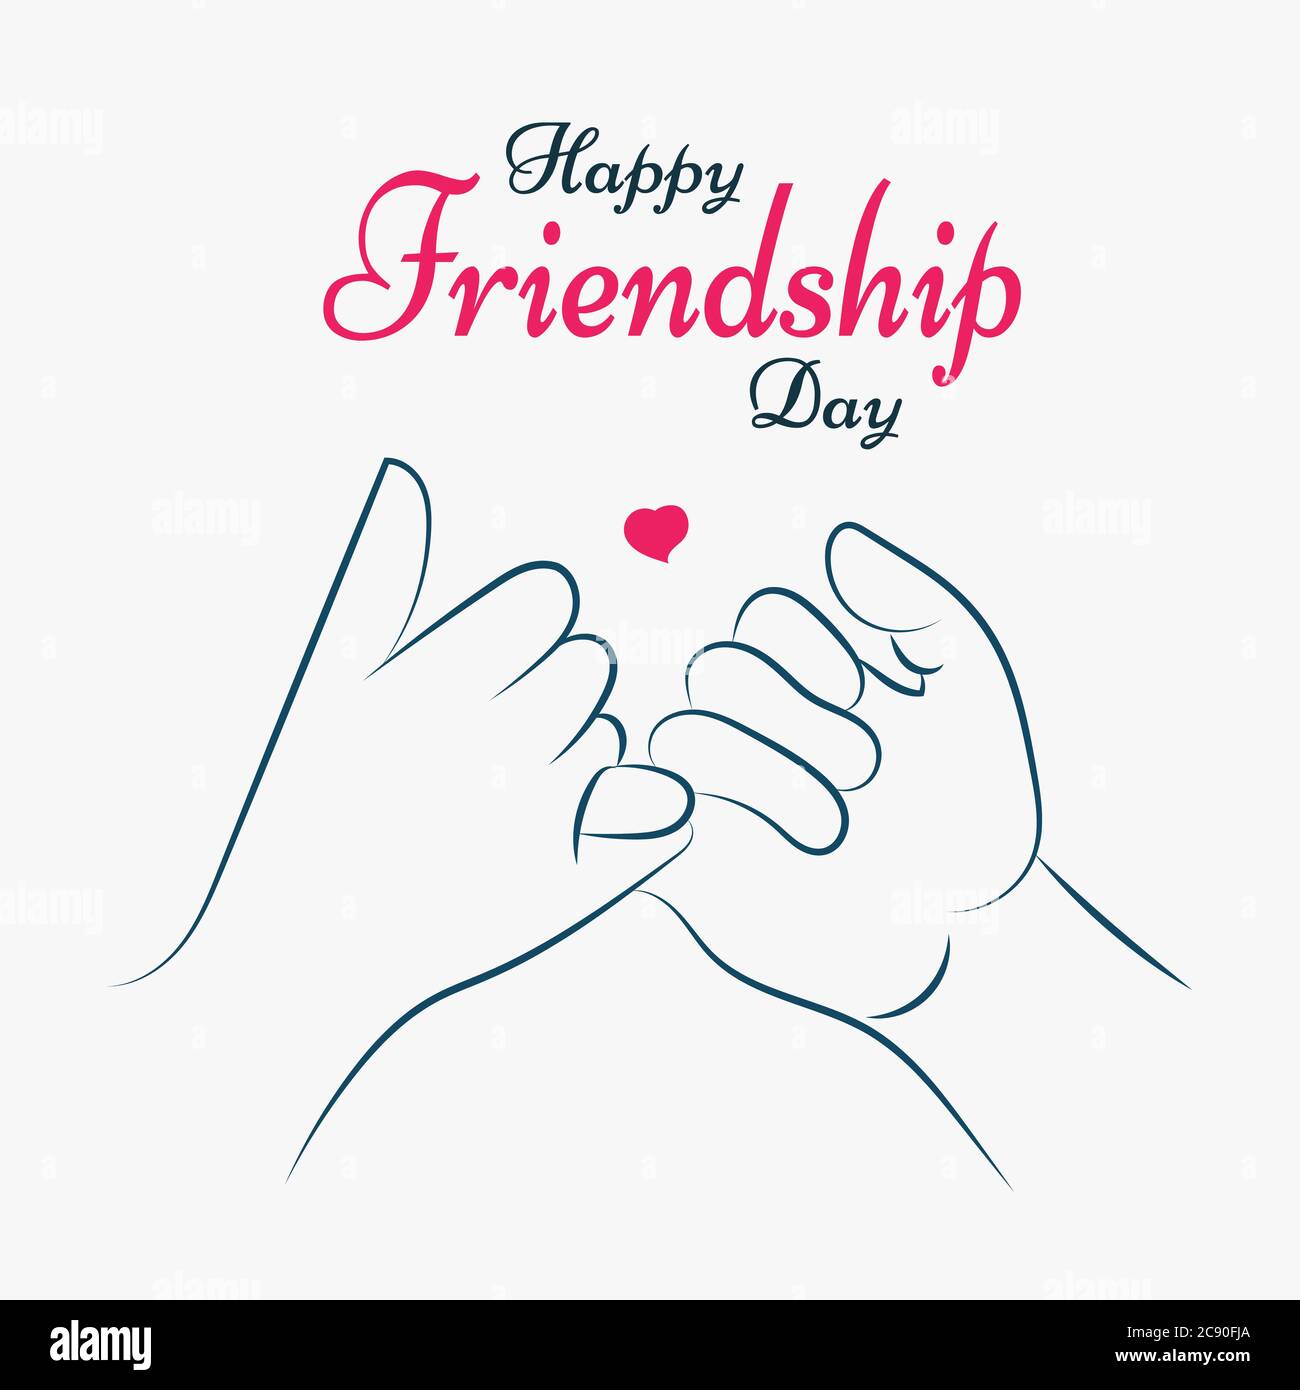 Happy Friendship Day, friends pinky promise, love flat ...